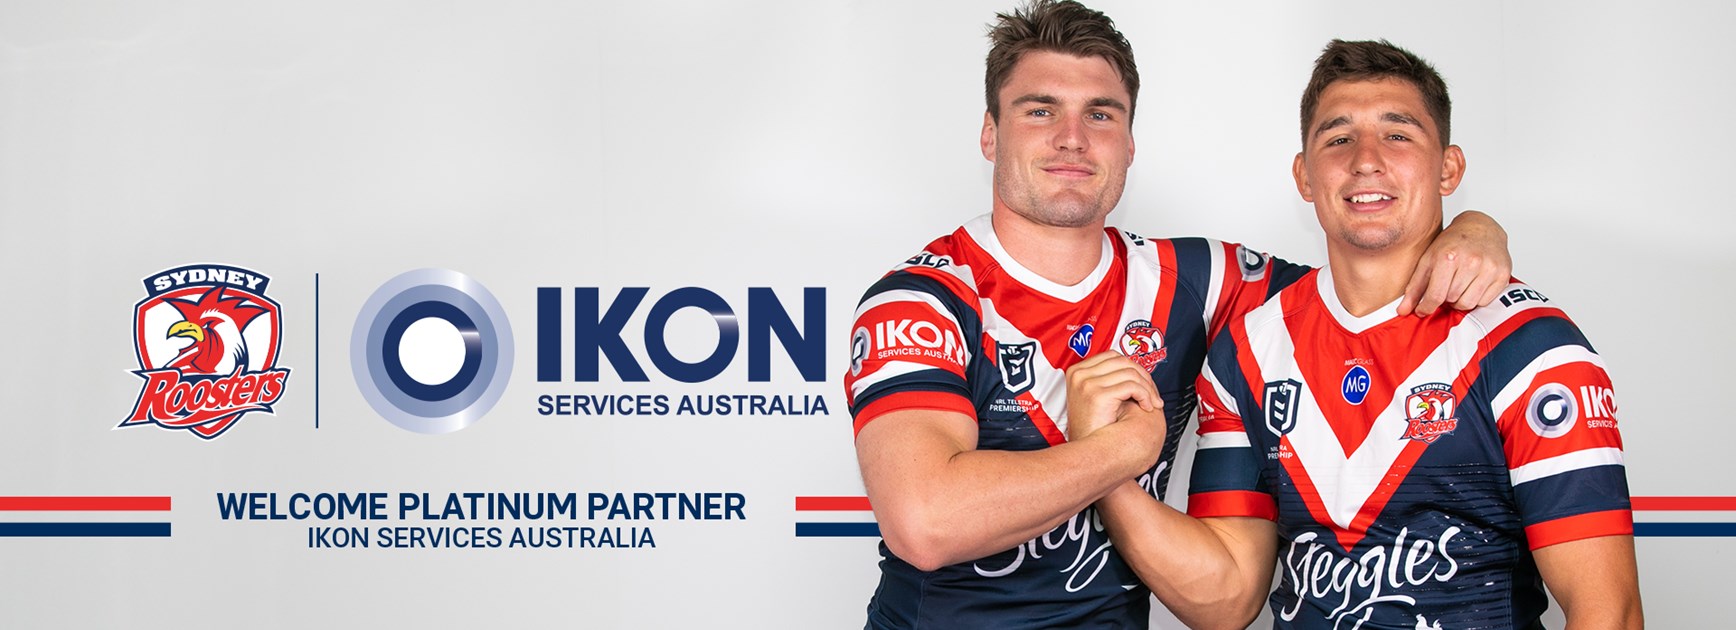 Roosters proud to partner with IKON Services Australia